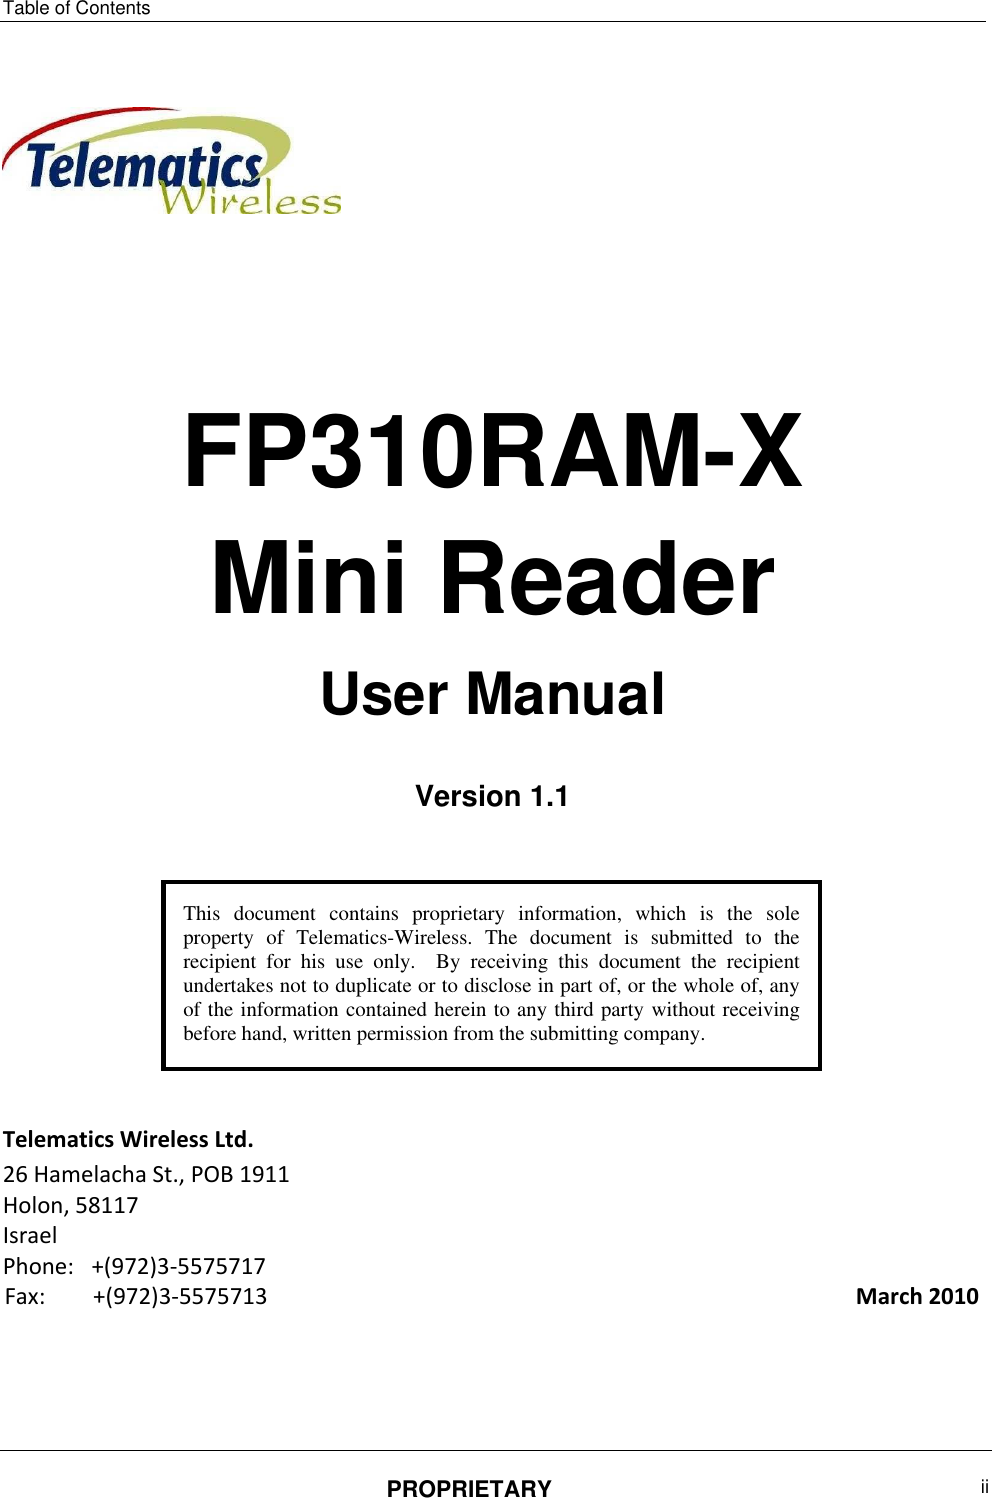 Table of Contents PROPRIETARY  ii        FP310RAM-X  Mini Reader User Manual  Version 1.1        Telematics Wireless Ltd. 26 Hamelacha St., POB 1911  Holon, 58117  Israel  Phone:  +(972)3-5575717 Fax:   +(972)3-5575713    March 2010       This  document  contains  proprietary  information,  which  is  the  sole property  of  Telematics-Wireless.  The  document  is  submitted  to  the recipient  for  his  use  only.    By  receiving  this  document  the  recipient undertakes not to duplicate or to disclose in part of, or the whole of, any of the information contained herein to any third party without receiving before hand, written permission from the submitting company.      